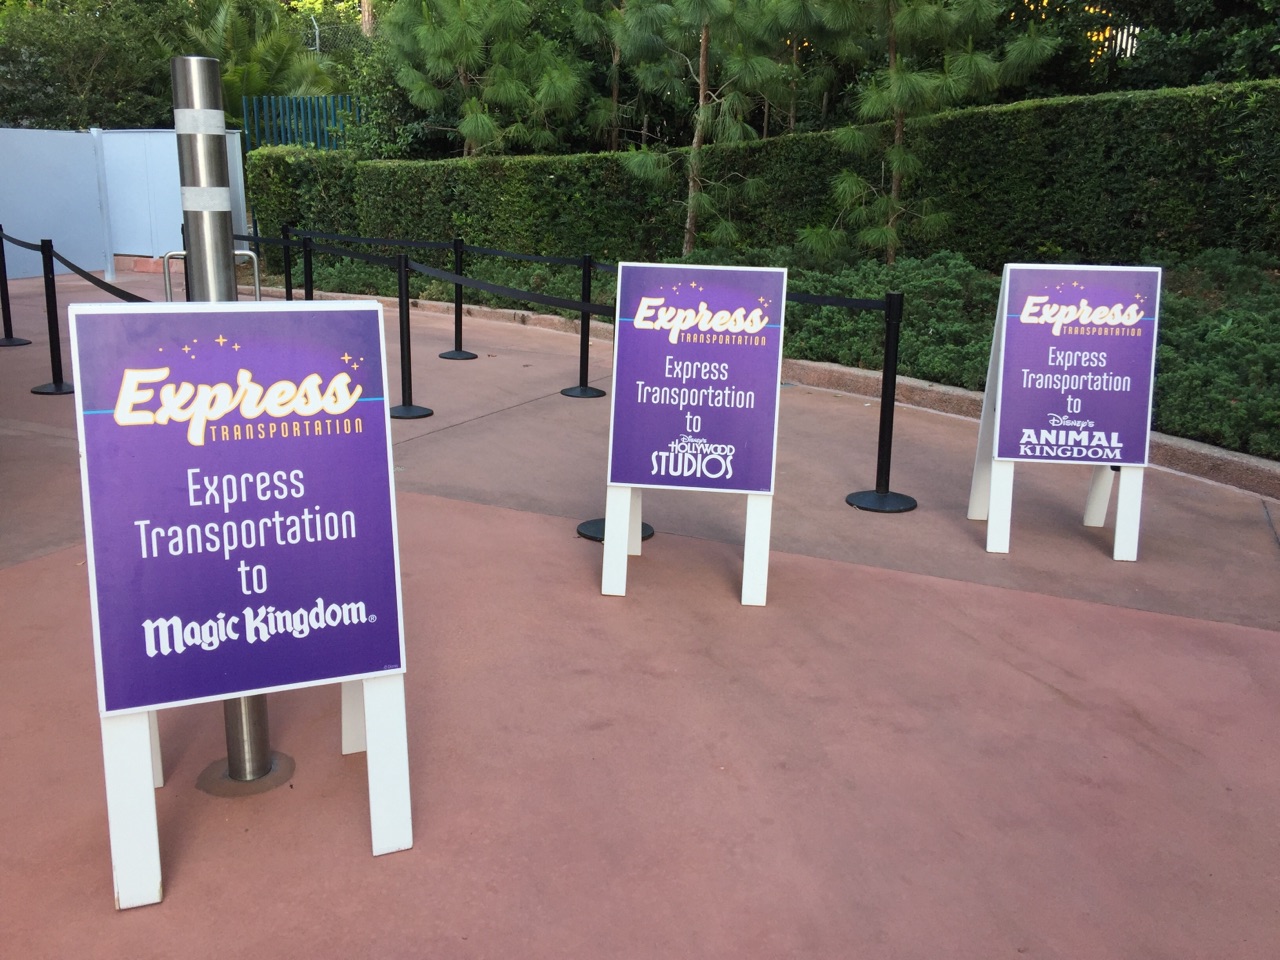 Express Transportation Summer Pass Special Offer for Passholders